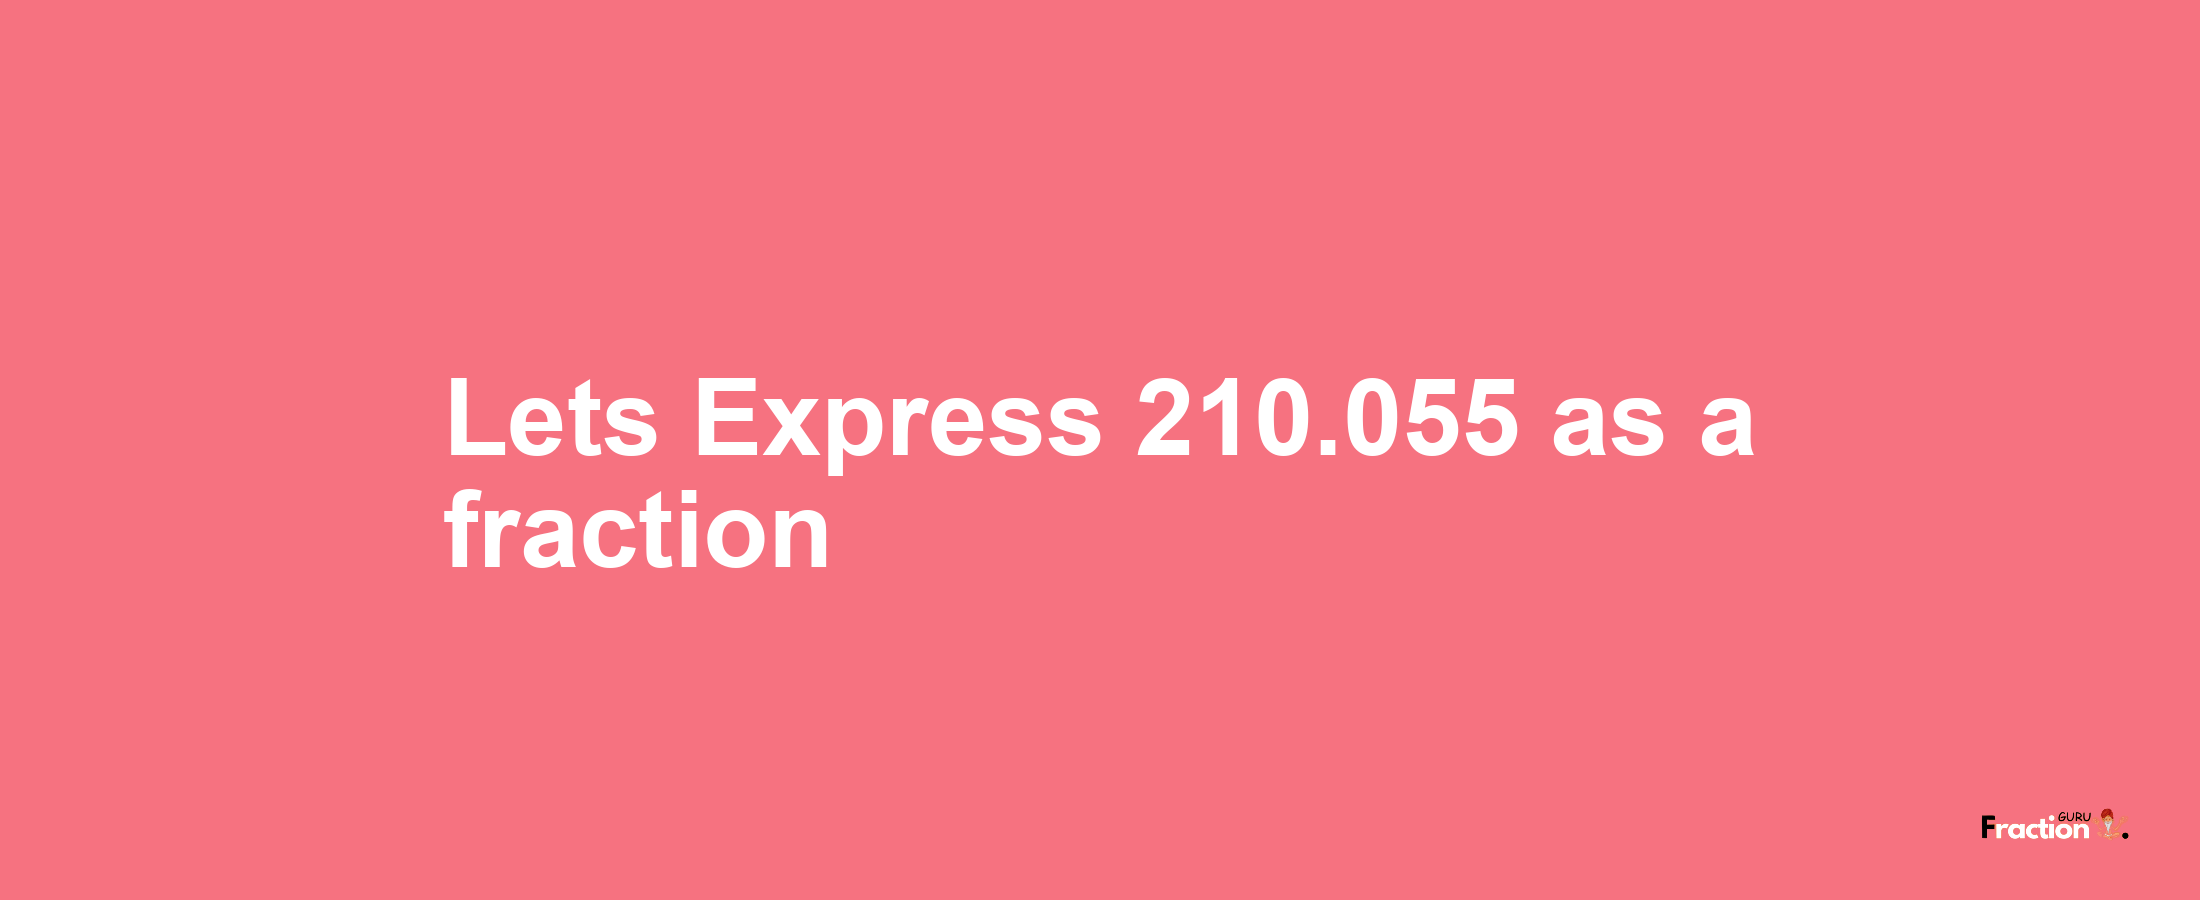 Lets Express 210.055 as afraction